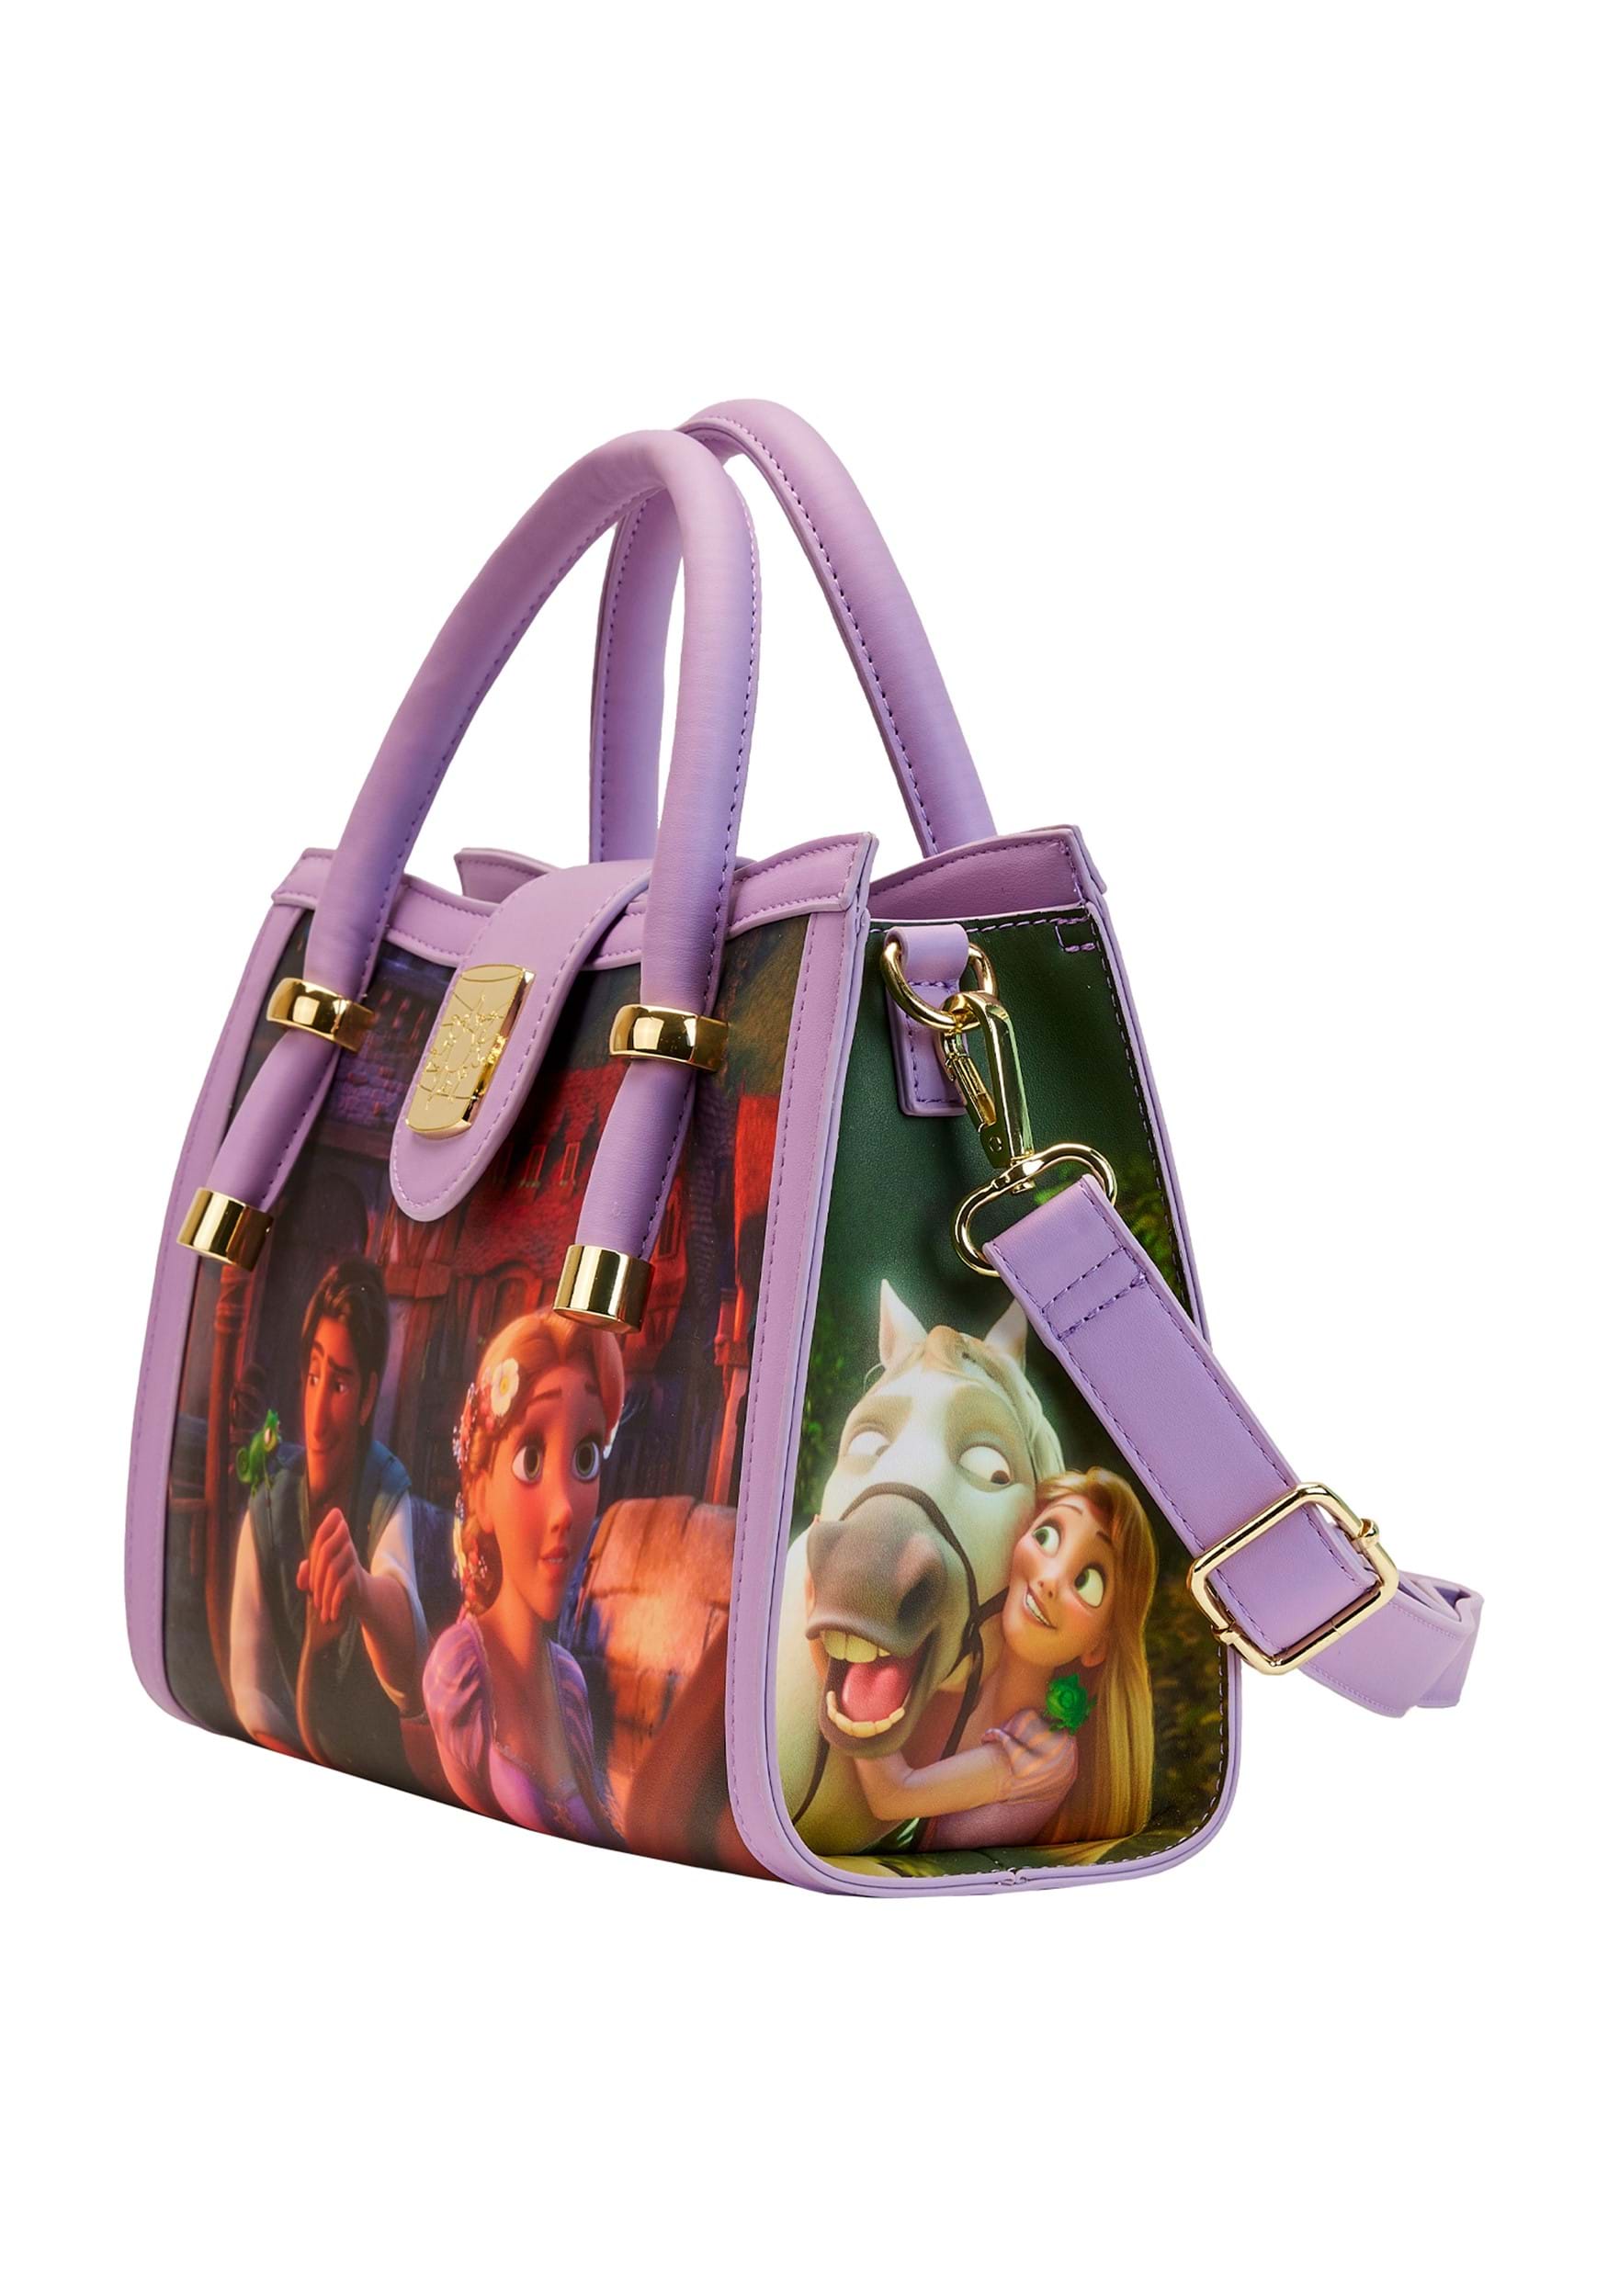 Loungefly, Bags, Tangled Rapunzel Dress Loungefly Backpack